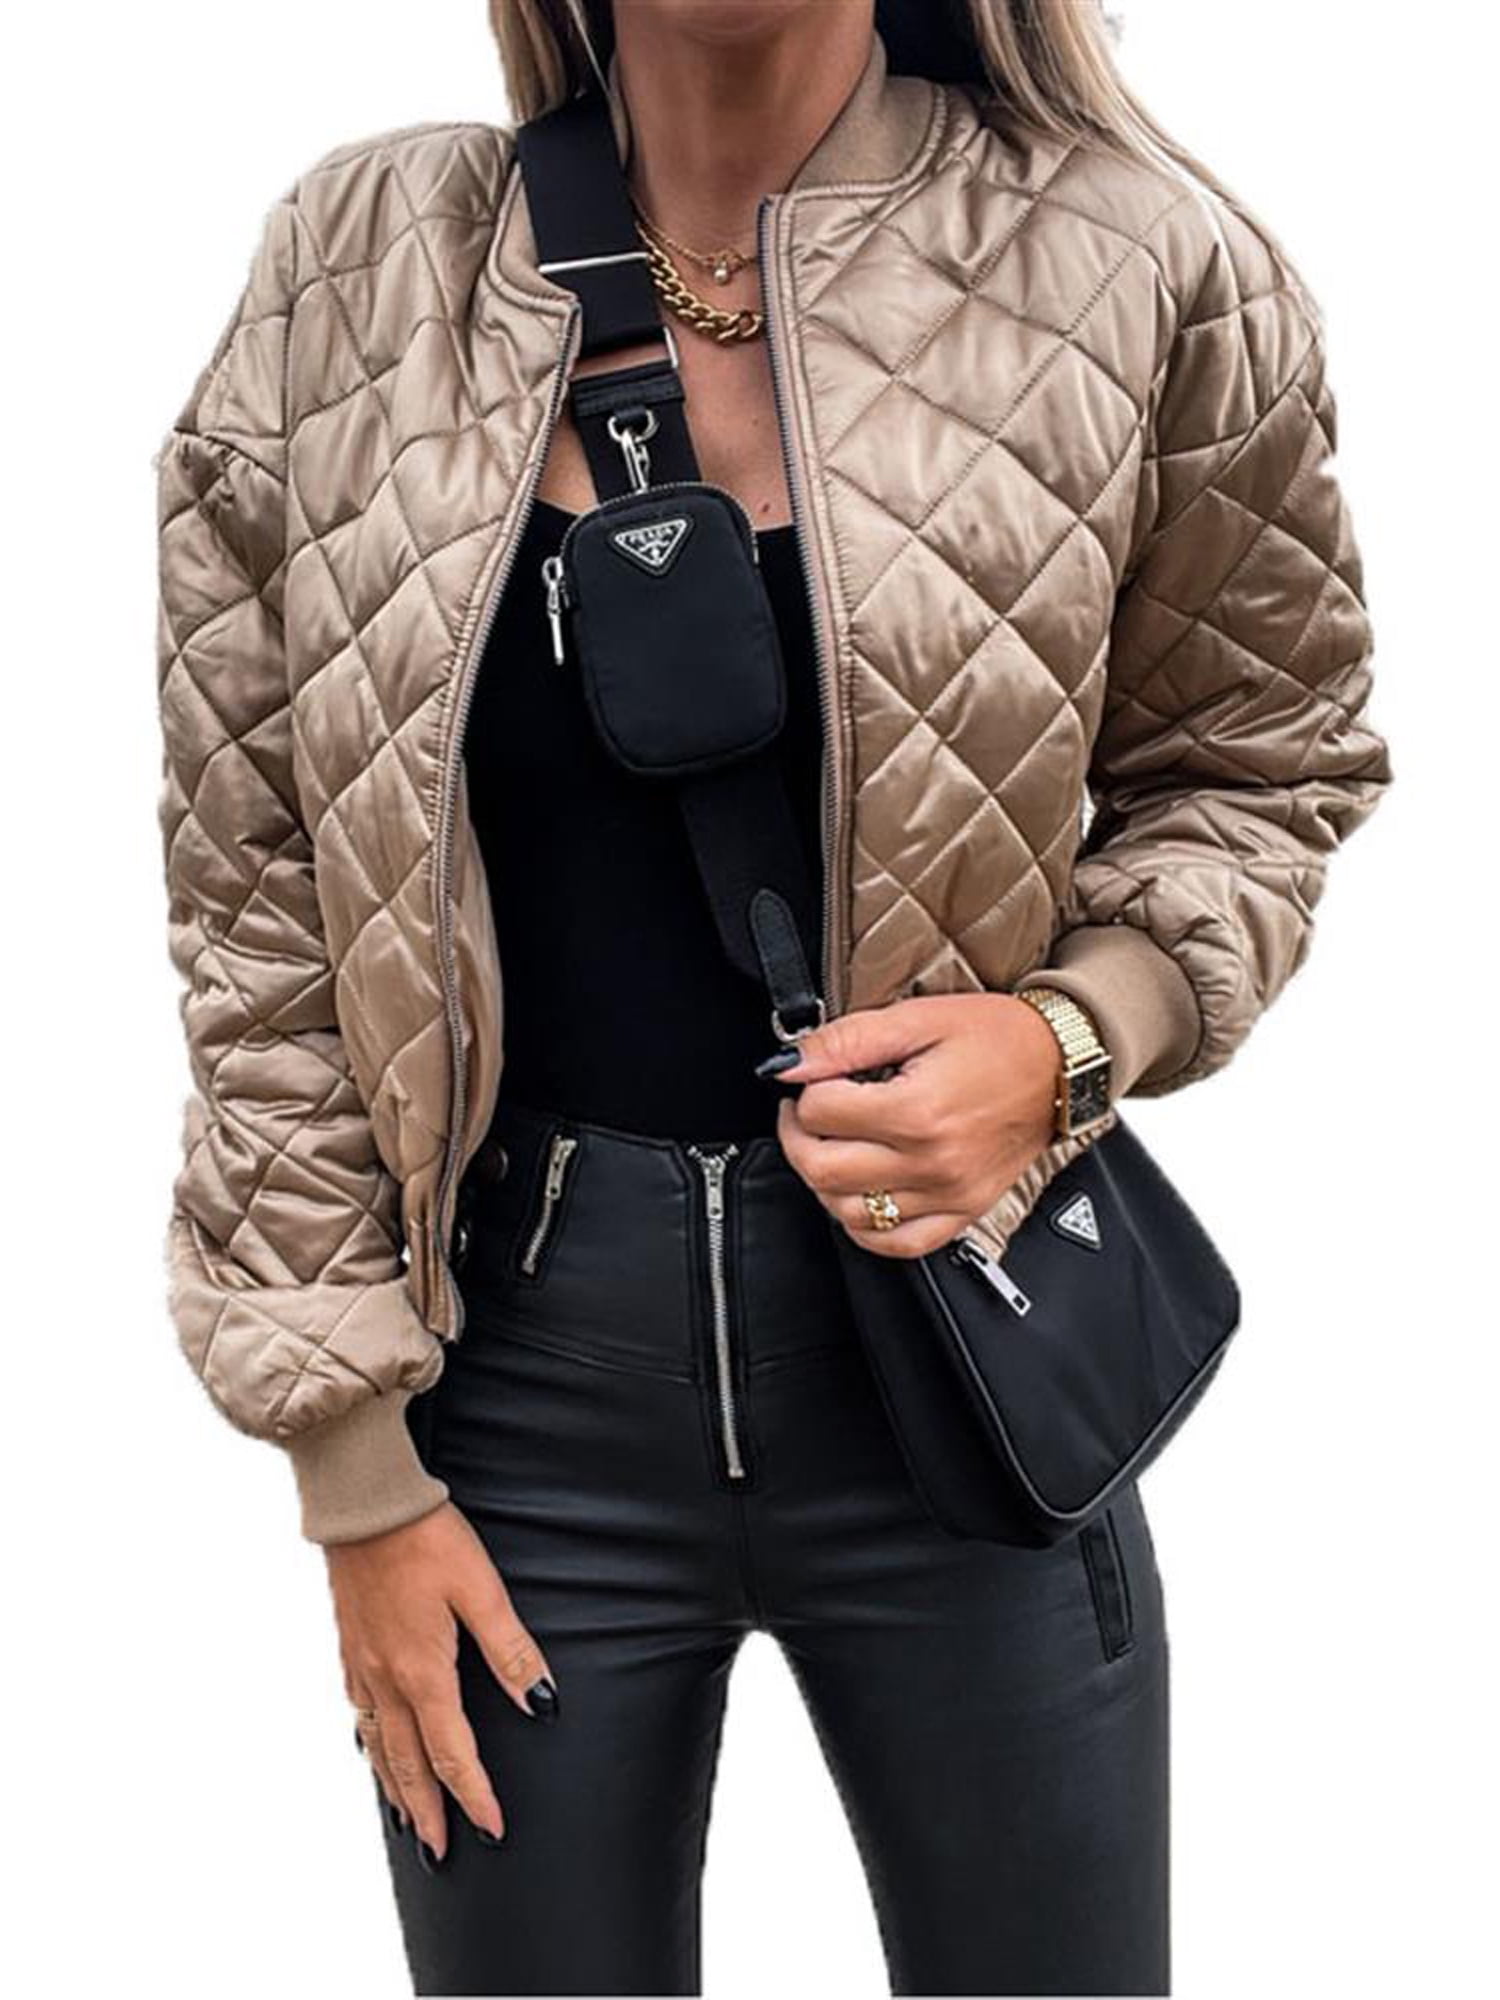 Dilgul Womens Quilted Jacket Lightweight Long Sleeves Zip Up Raglan Bomber Jackets with Pockets 